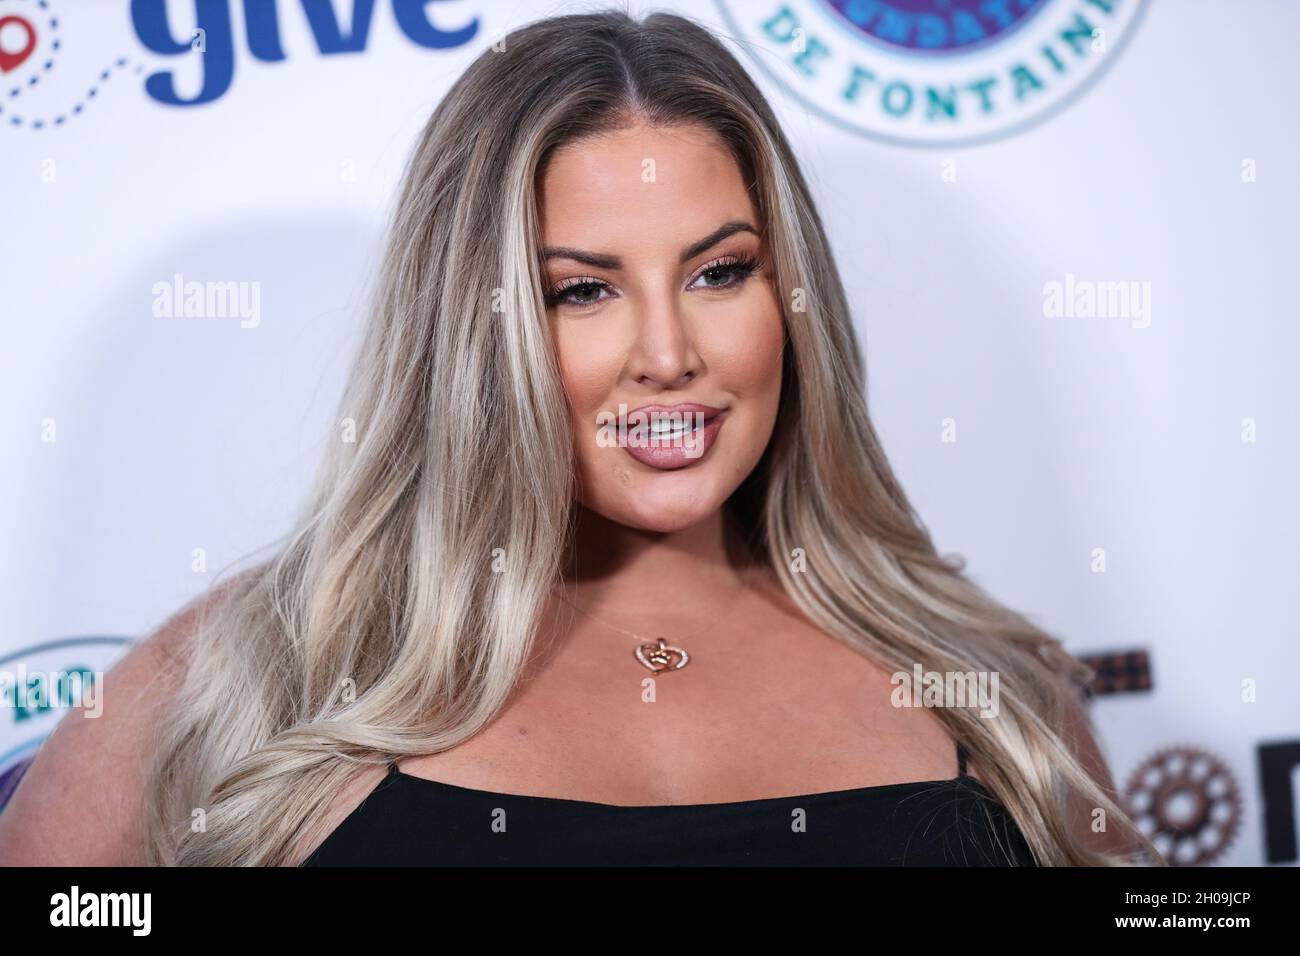 West Hollywood, United States. 11th Oct, 2021. WEST HOLLYWOOD, LOS ANGELES, CALIFORNIA, USA - OCTOBER 11: Model Ashley Alexiss arrives at Travel and GIVE's 4th Annual 'Travel With A Purpose' Fundraiser With Lisa Vanderpump (Fundraiser to Benefit Teletherapy Program and Communities in Haiti Affected by Earthquake) held at TOM TOM Restaurant and Bar on October 11, 2021 in West Hollywood, Los Angeles, California, United States. (Photo by Xavier Collin/Image Press Agency/Sipa USA) Credit: Sipa USA/Alamy Live News Stock Photo